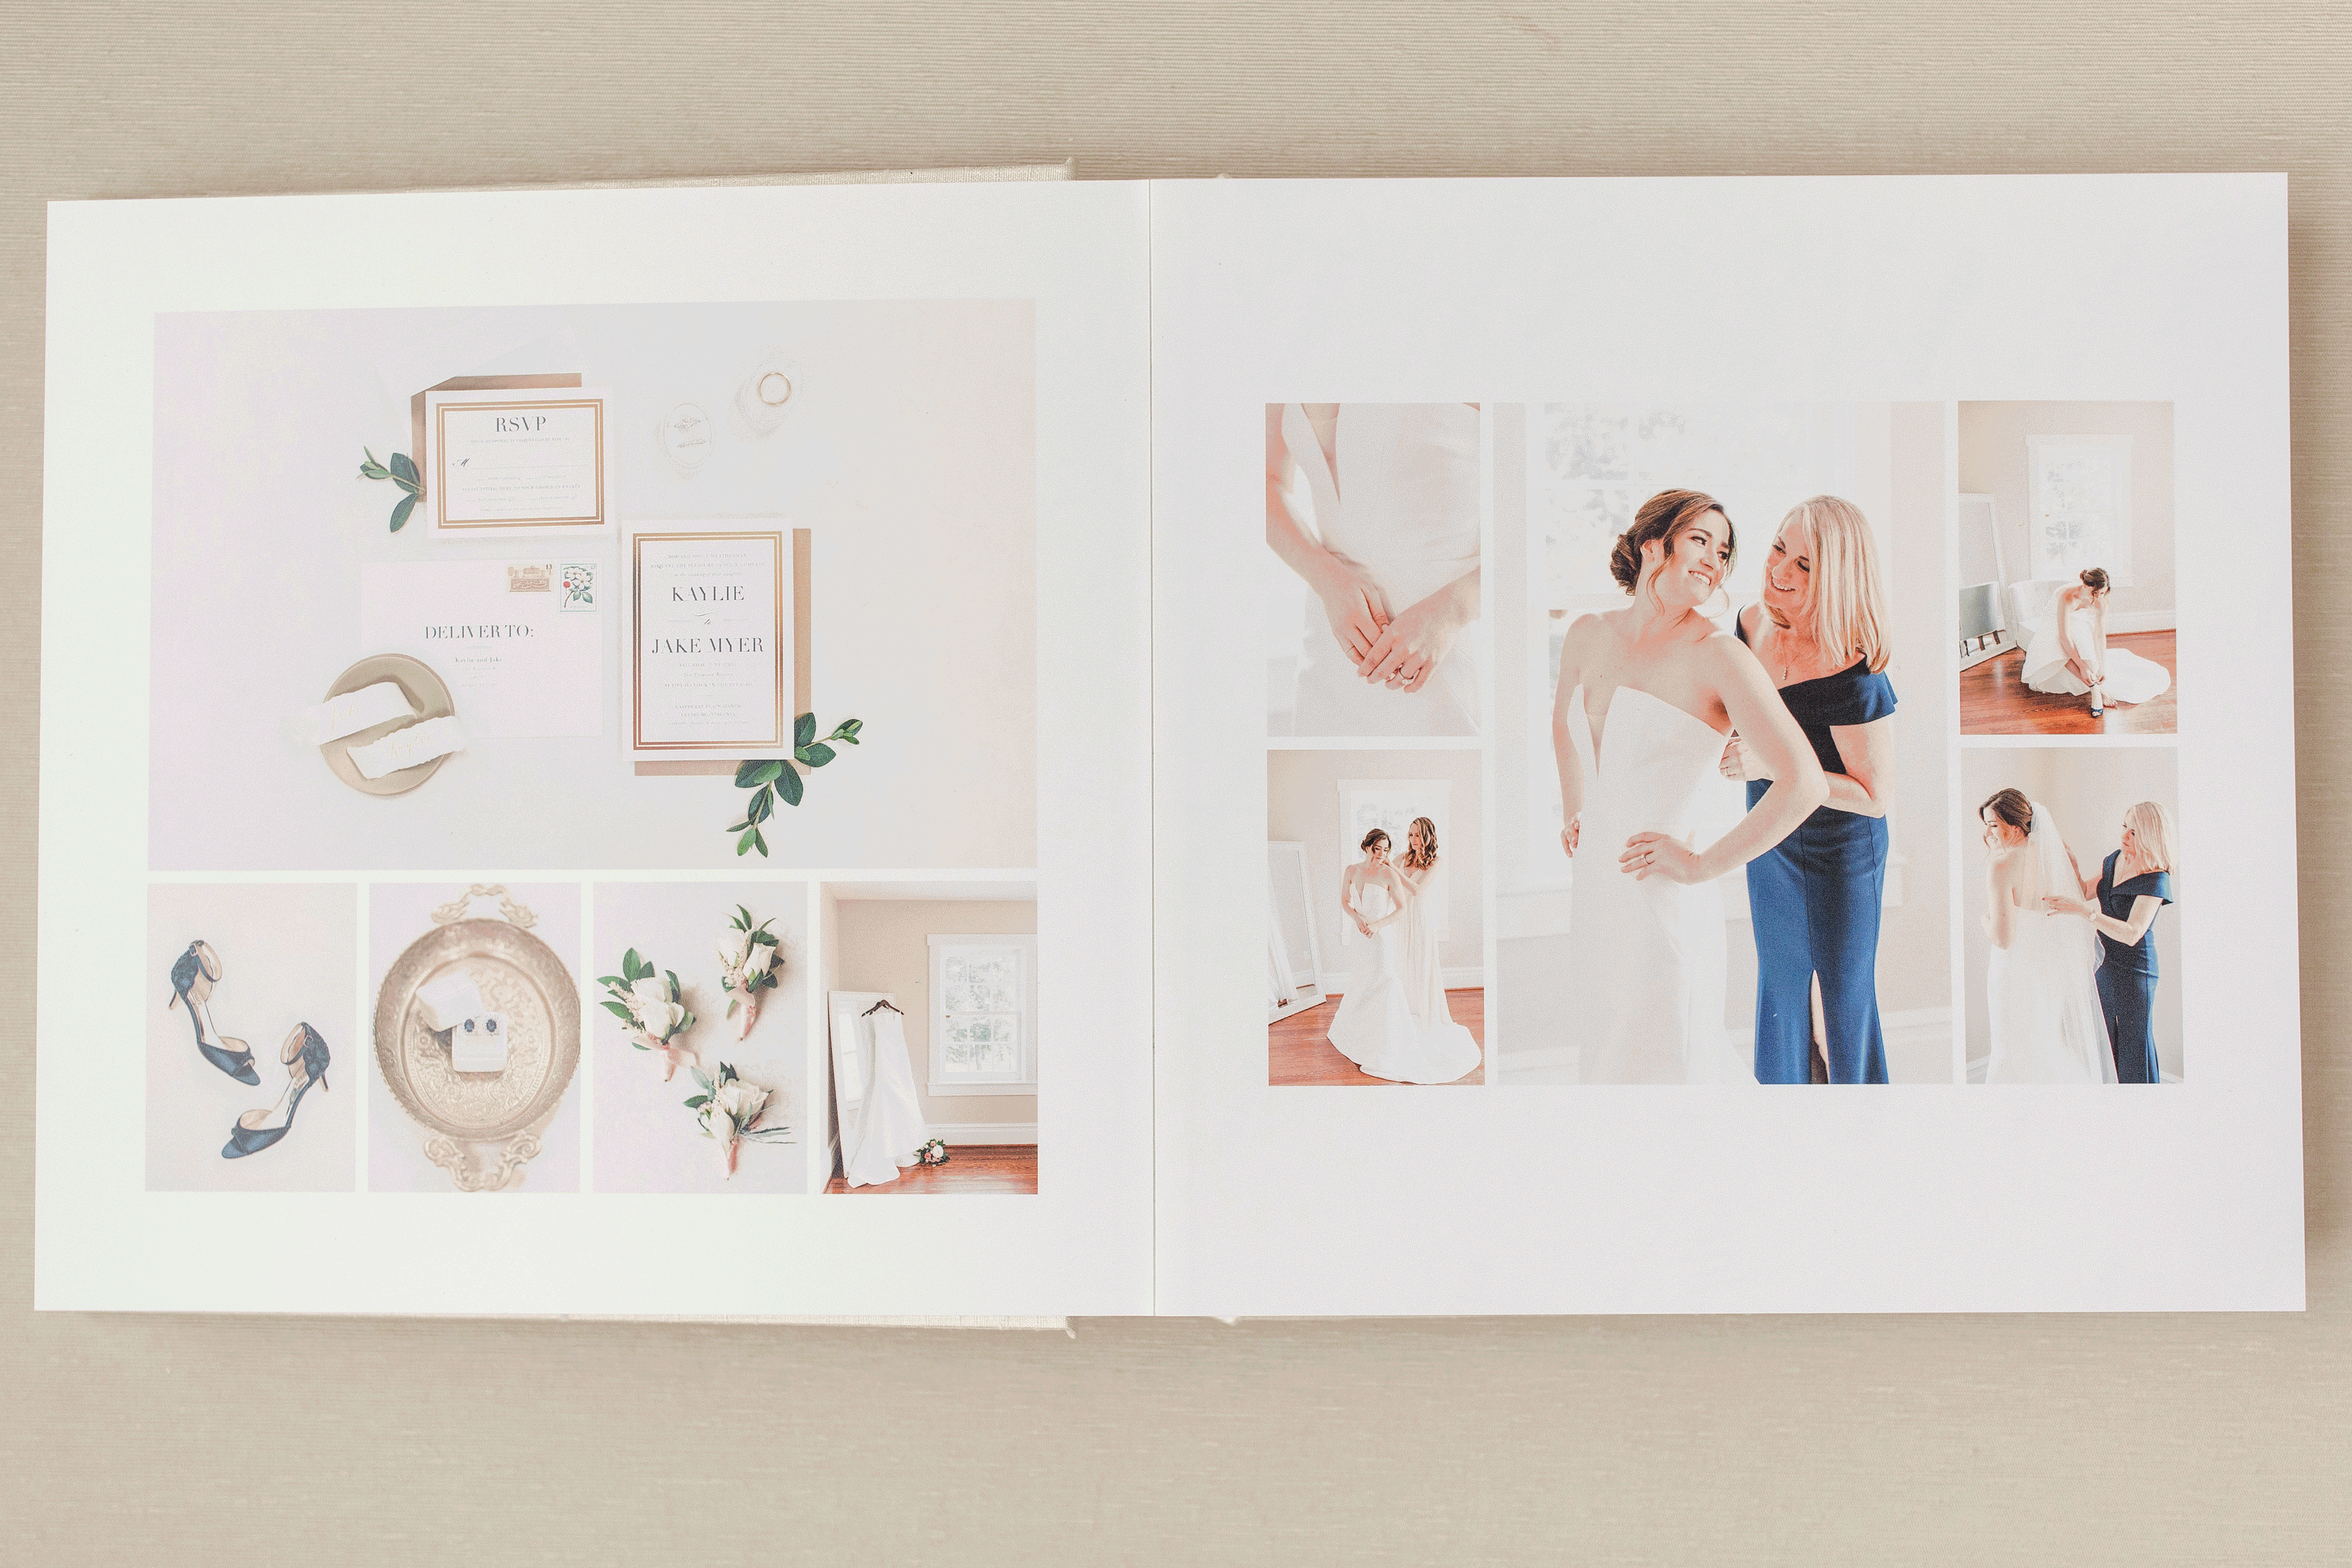 This elegant silk wedding album makes for the perfect family heirloom after the big day.